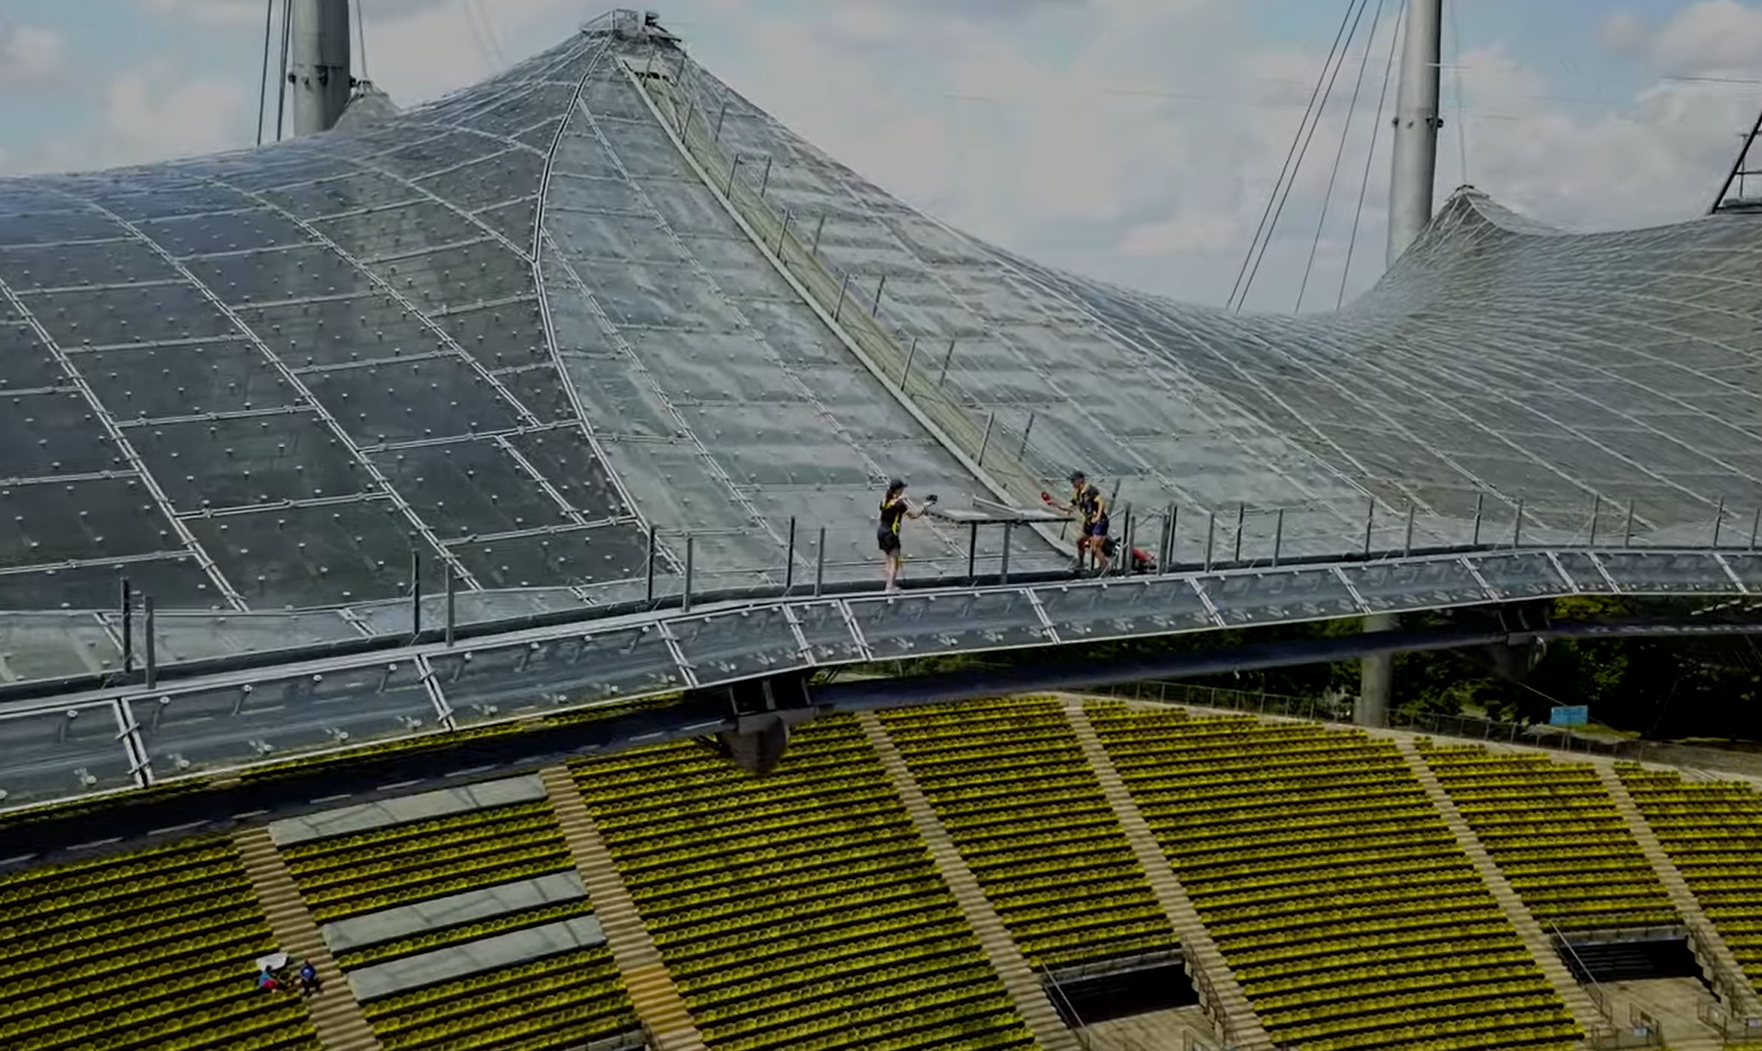 Sabine Winter and her father played able tennis on the roof of the Olympic Stadium in Munich ©Munich 2022